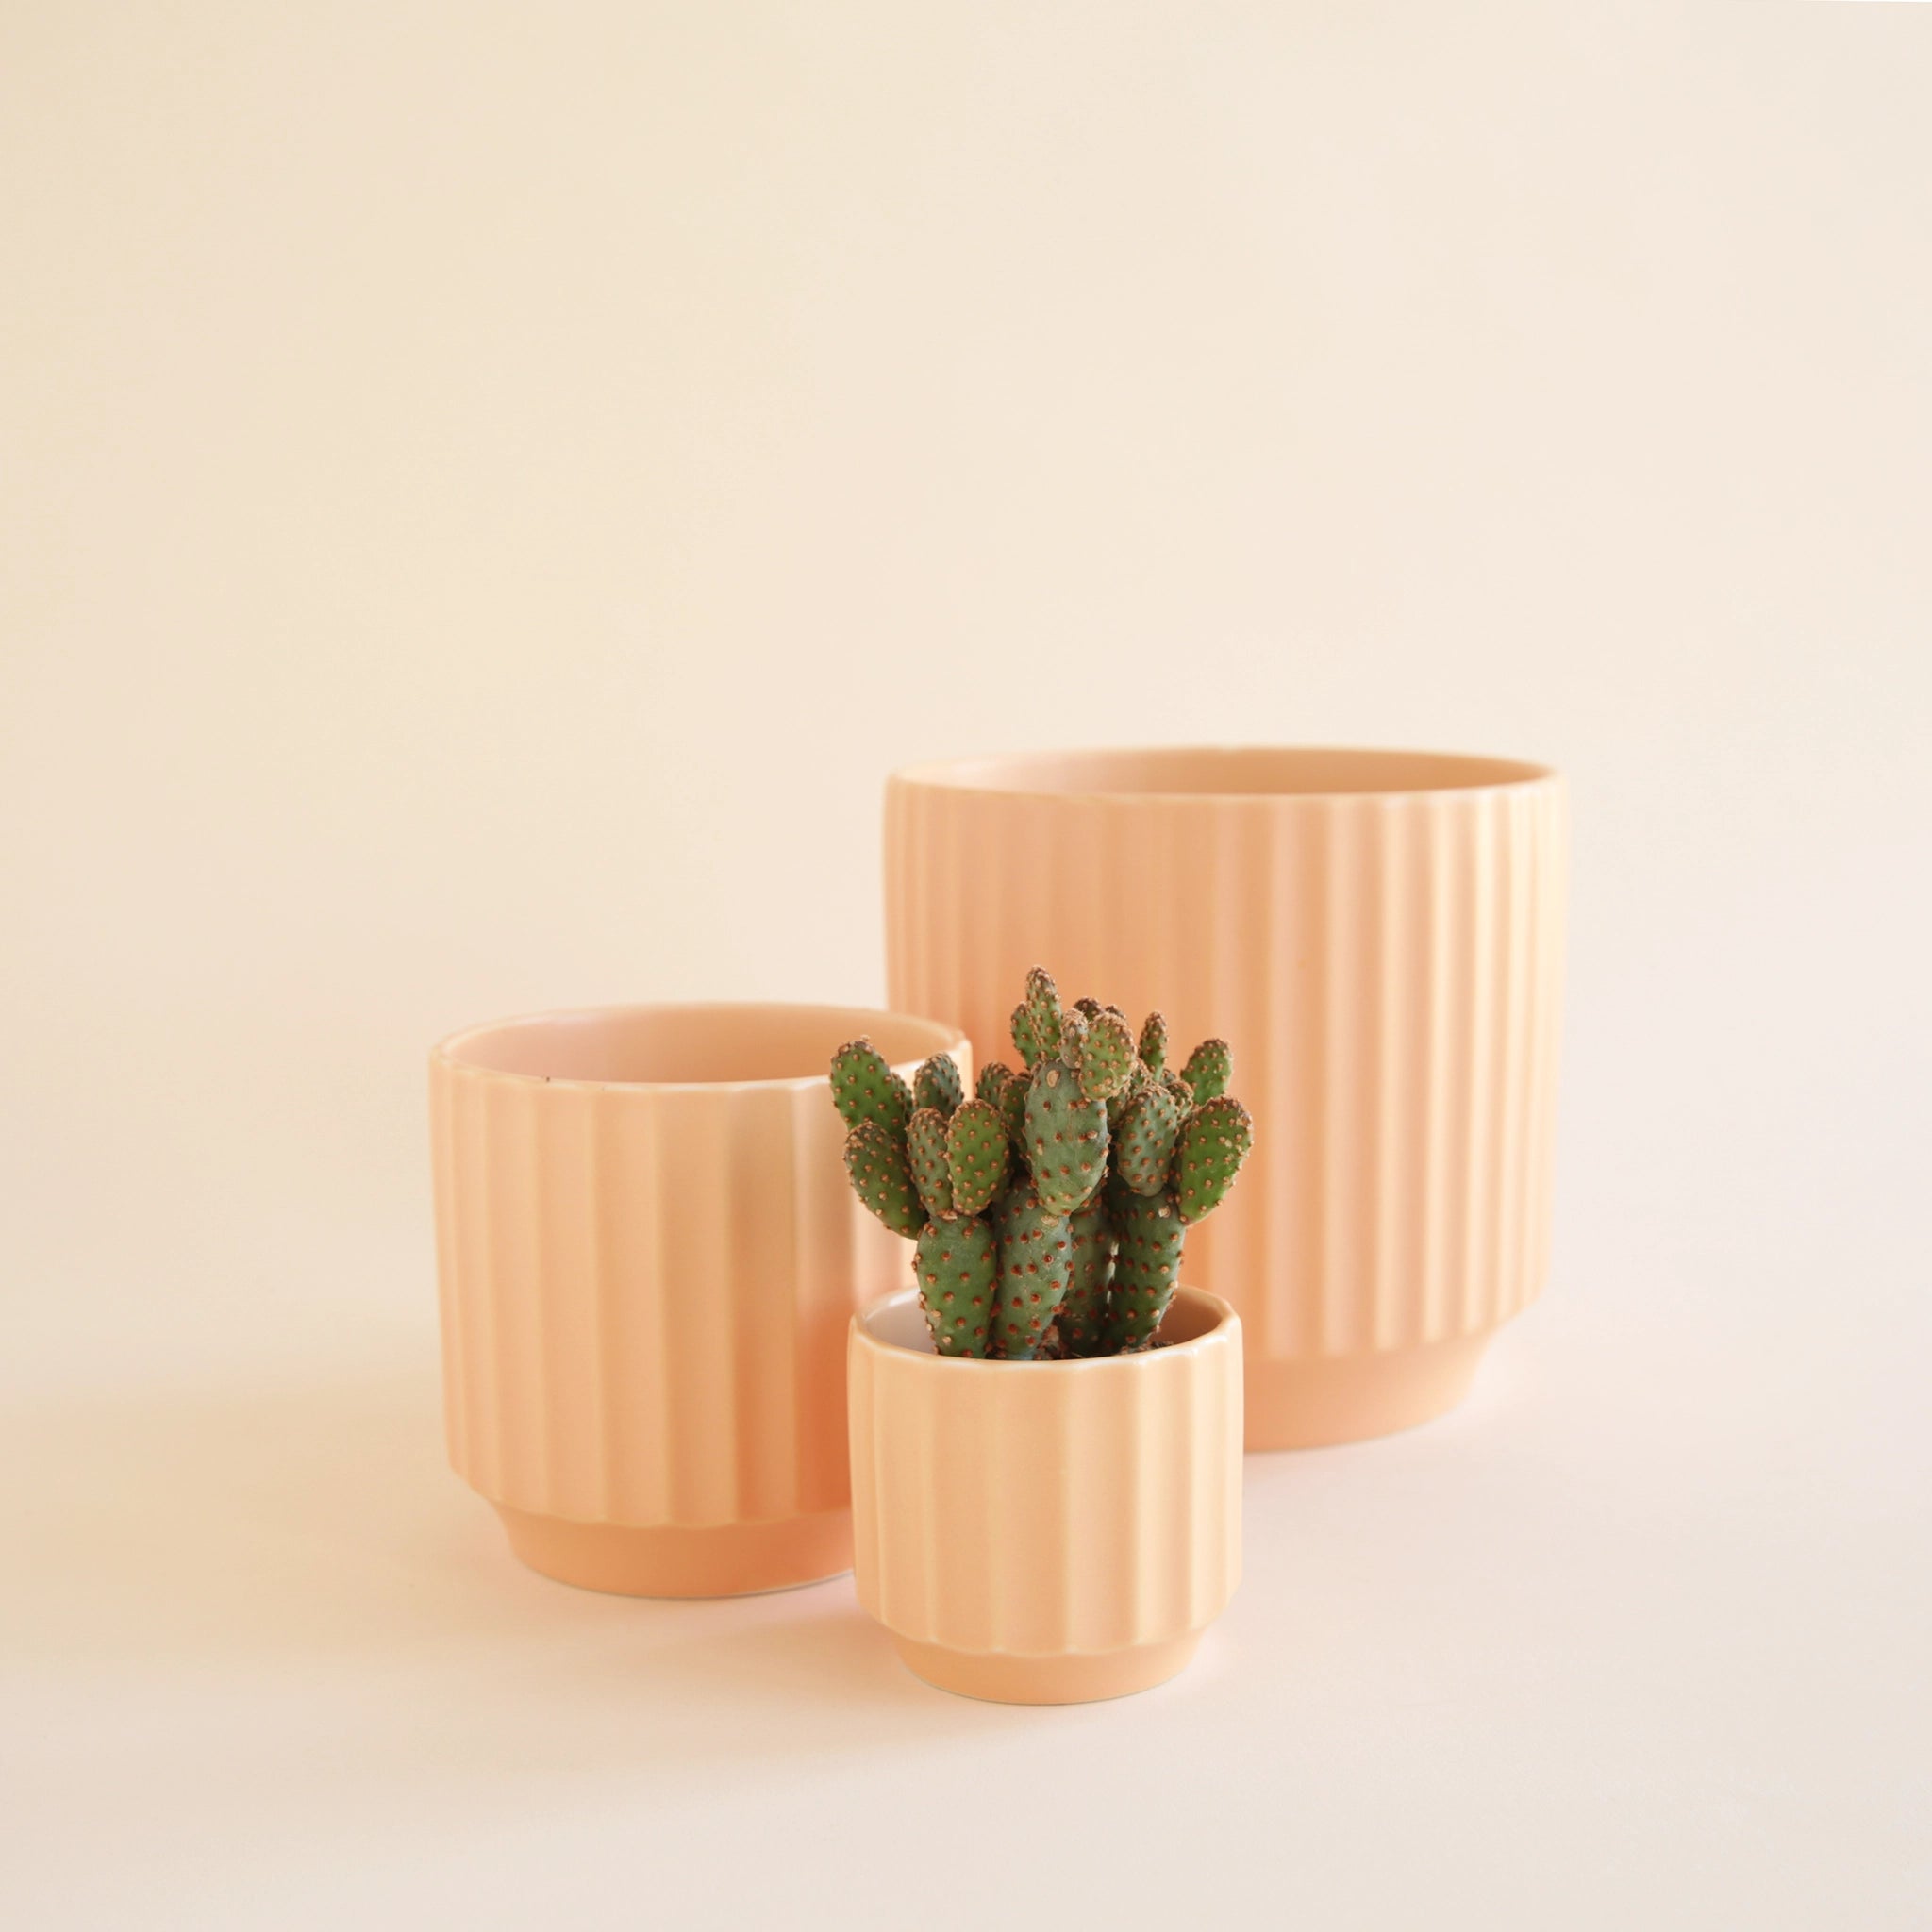 On an ivory background is three different shaped ceramic pots in a warm toned pink shade.